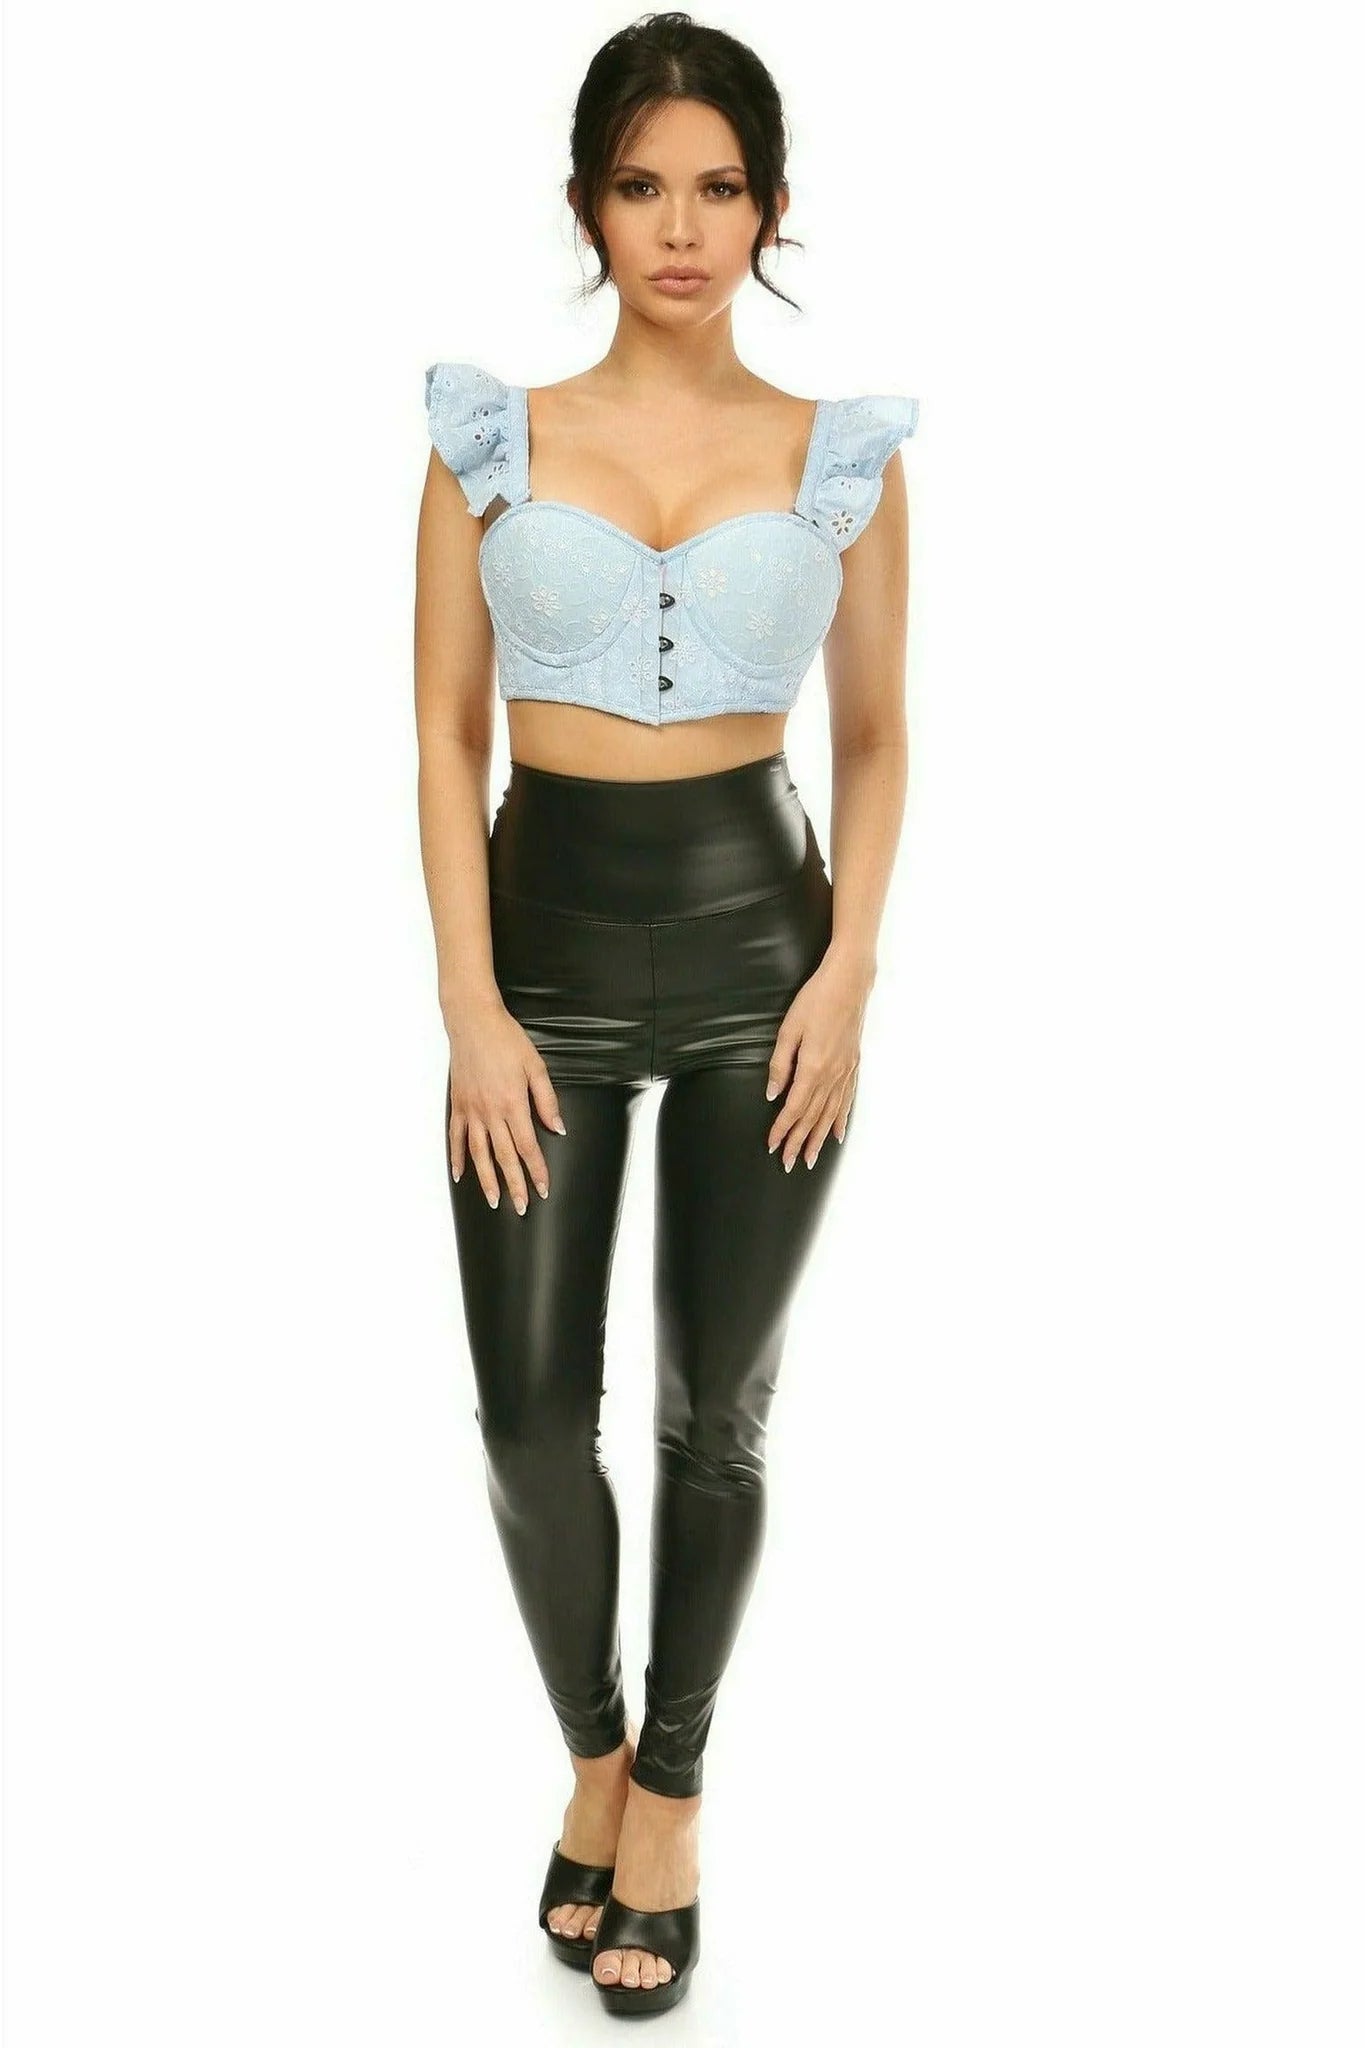 Lavish Eyelet Underwire Bustier Top w/ Removable Ruffle Sleeves